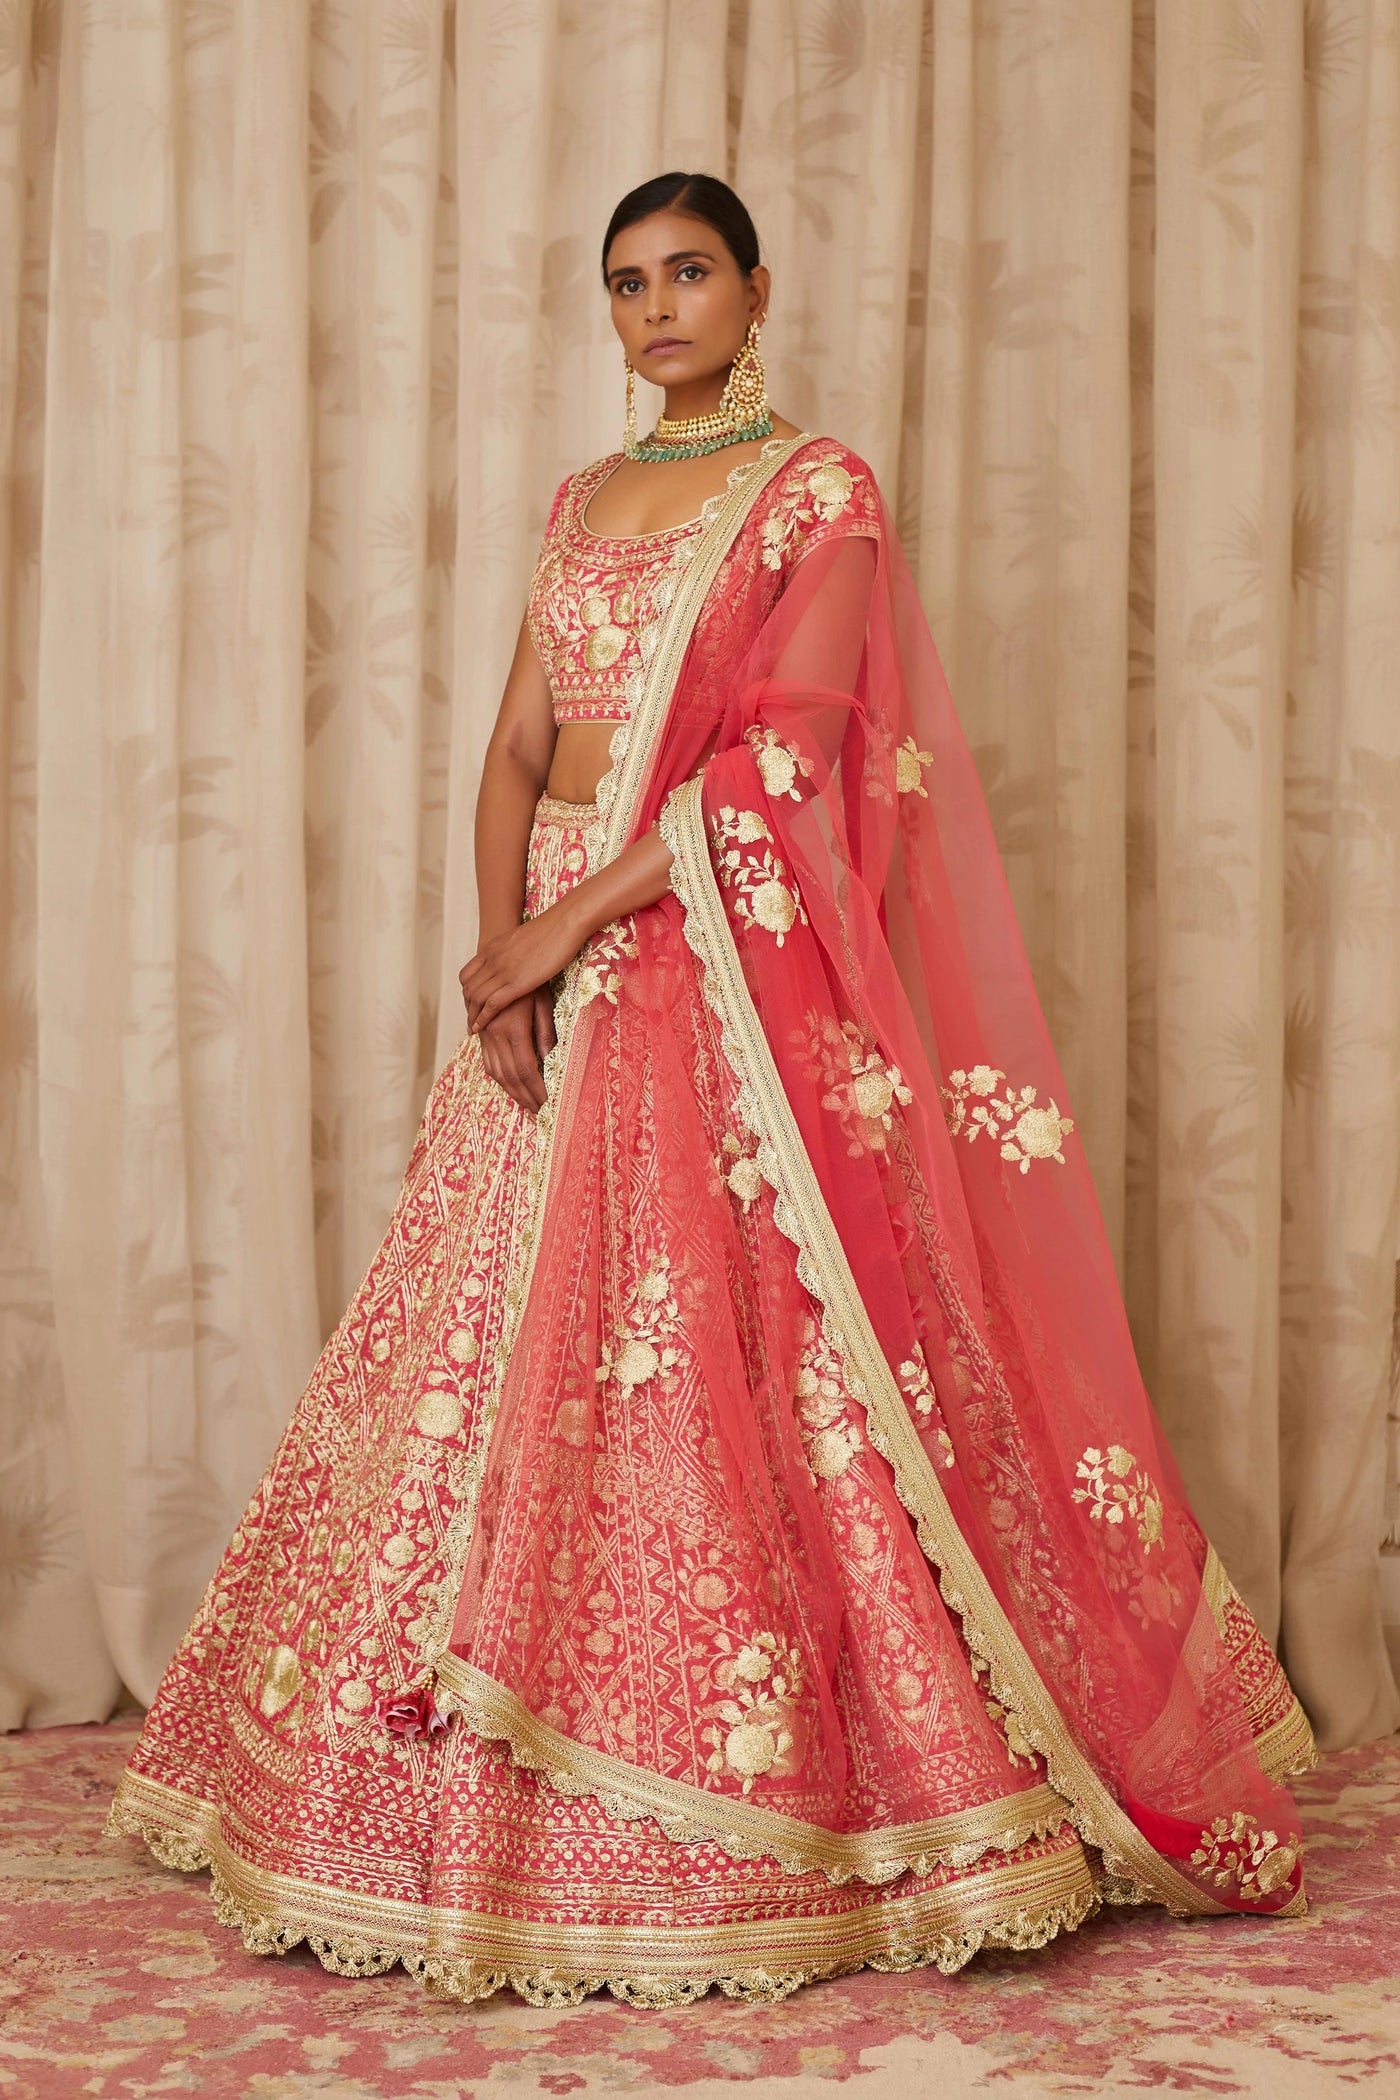 Coral Embroidered Lehenga Indian Clothing in Denver, CO, Aurora, CO, Boulder, CO, Fort Collins, CO, Colorado Springs, CO, Parker, CO, Highlands Ranch, CO, Cherry Creek, CO, Centennial, CO, and Longmont, CO. NATIONWIDE SHIPPING USA- India Fashion X